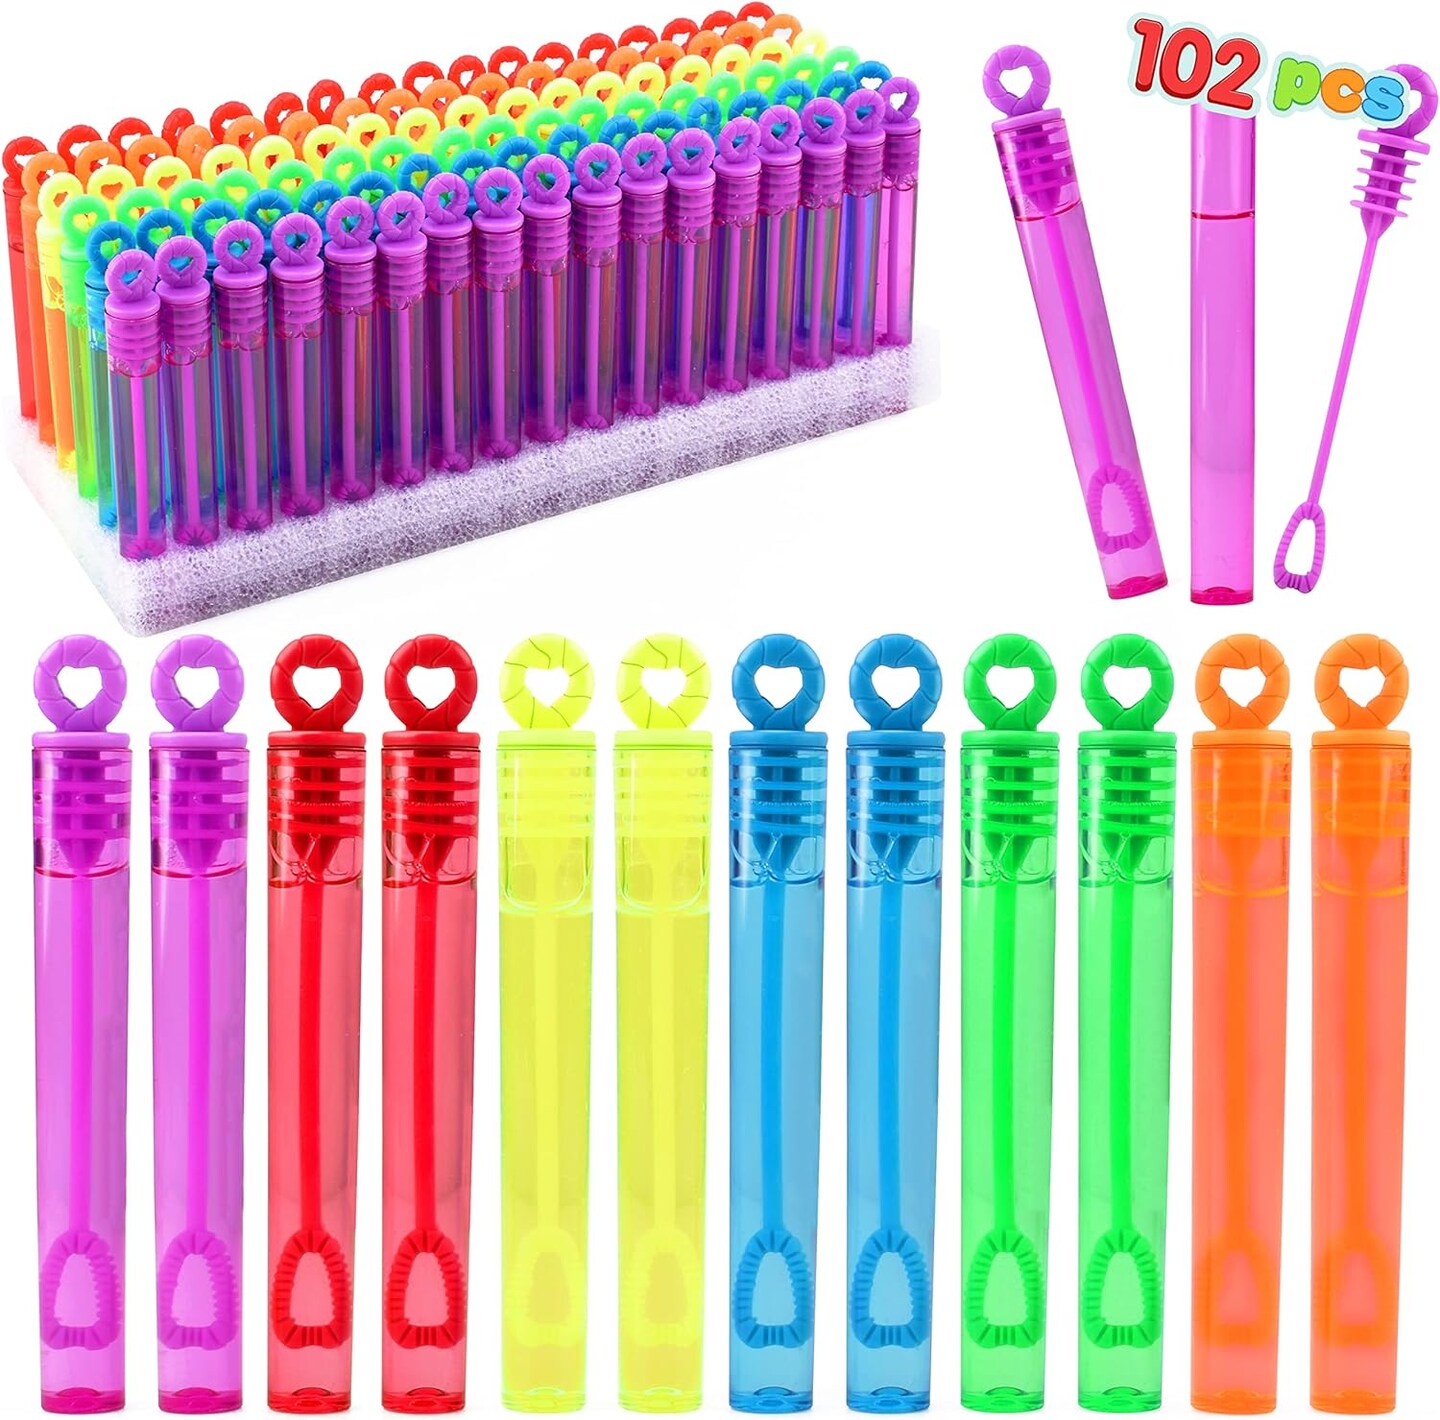 JOYIN 102 Pieces, 6 Colours Mini Bubble Wands Bulk Party Favours Assortment Toys for Children, Carnival Prizes, Wedding, Outdoor Gifts for Girls and Boys Easter Basket Stuffers Goodie Gift Bag Stuffers